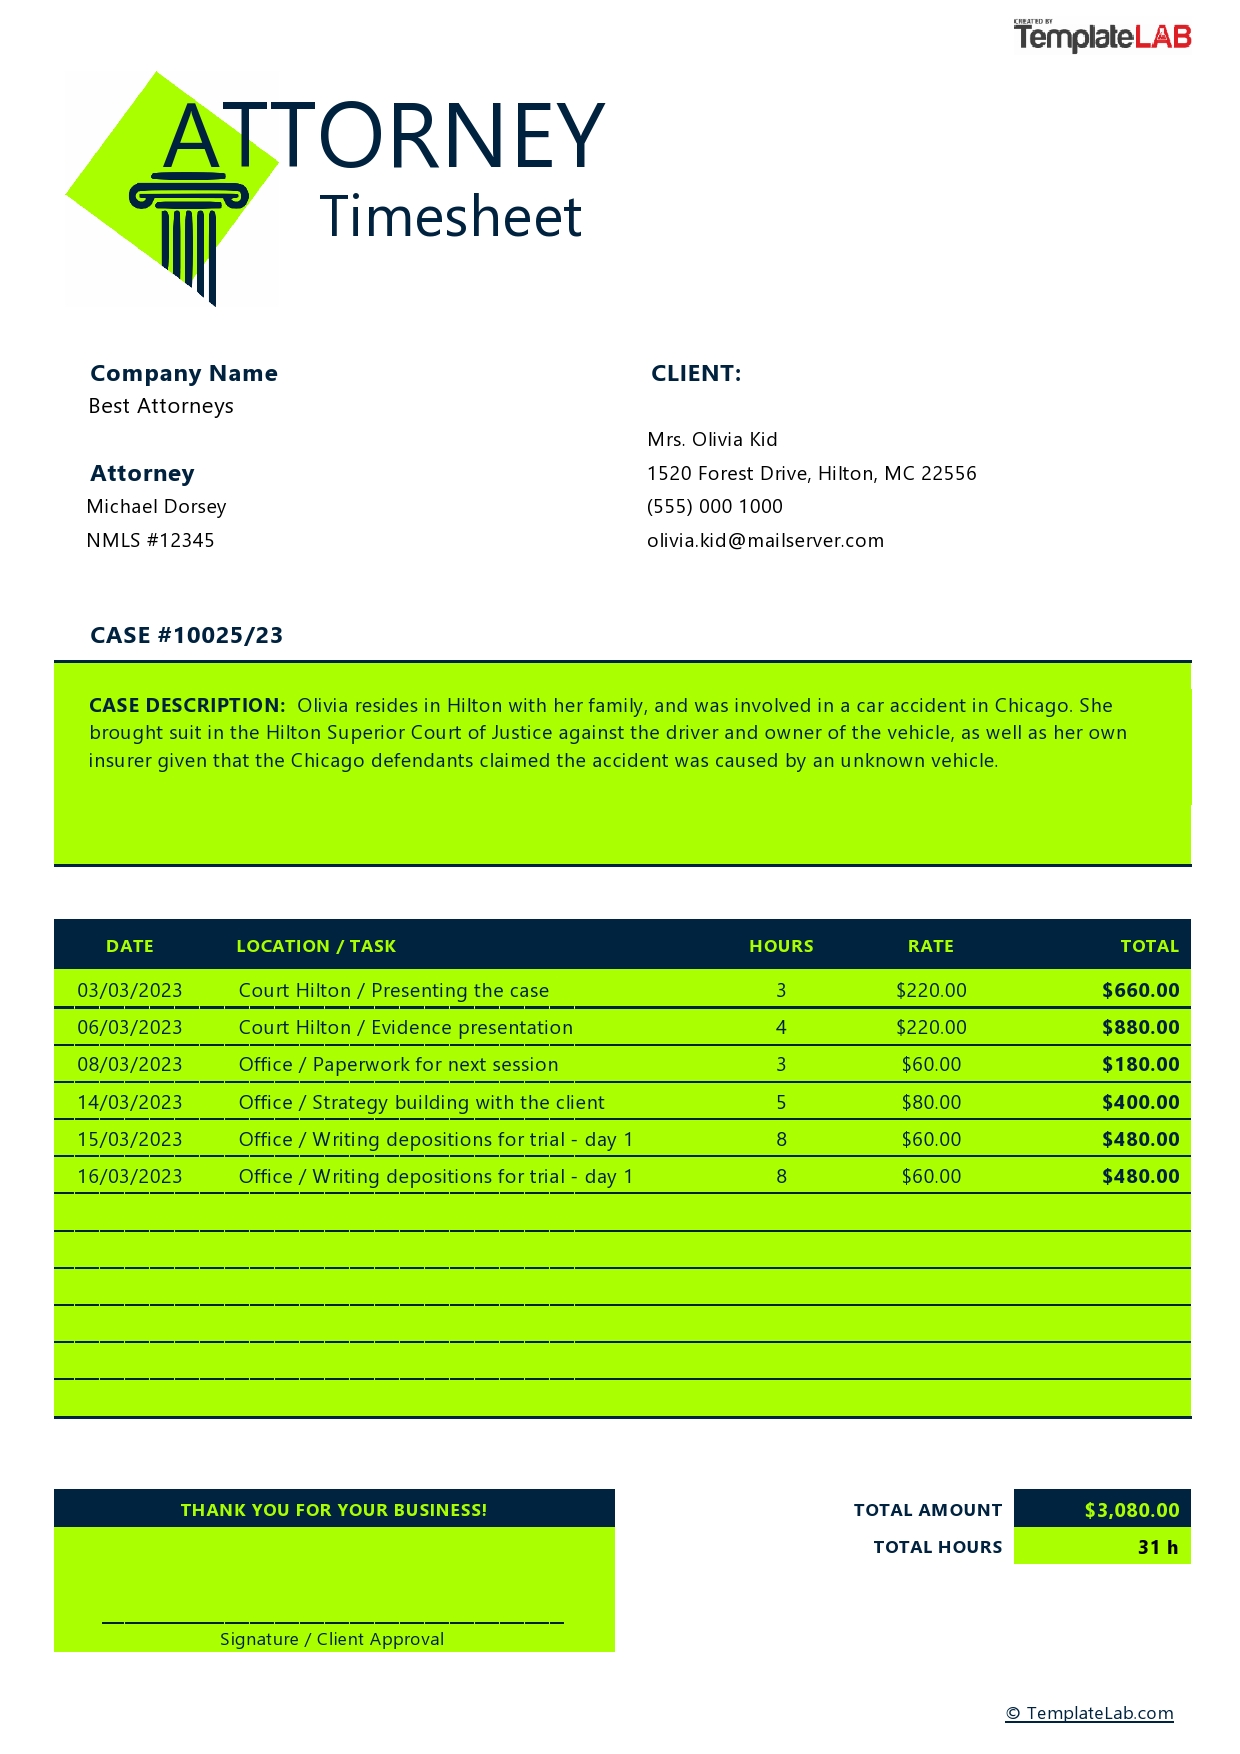 Free Attorney Timesheet Template